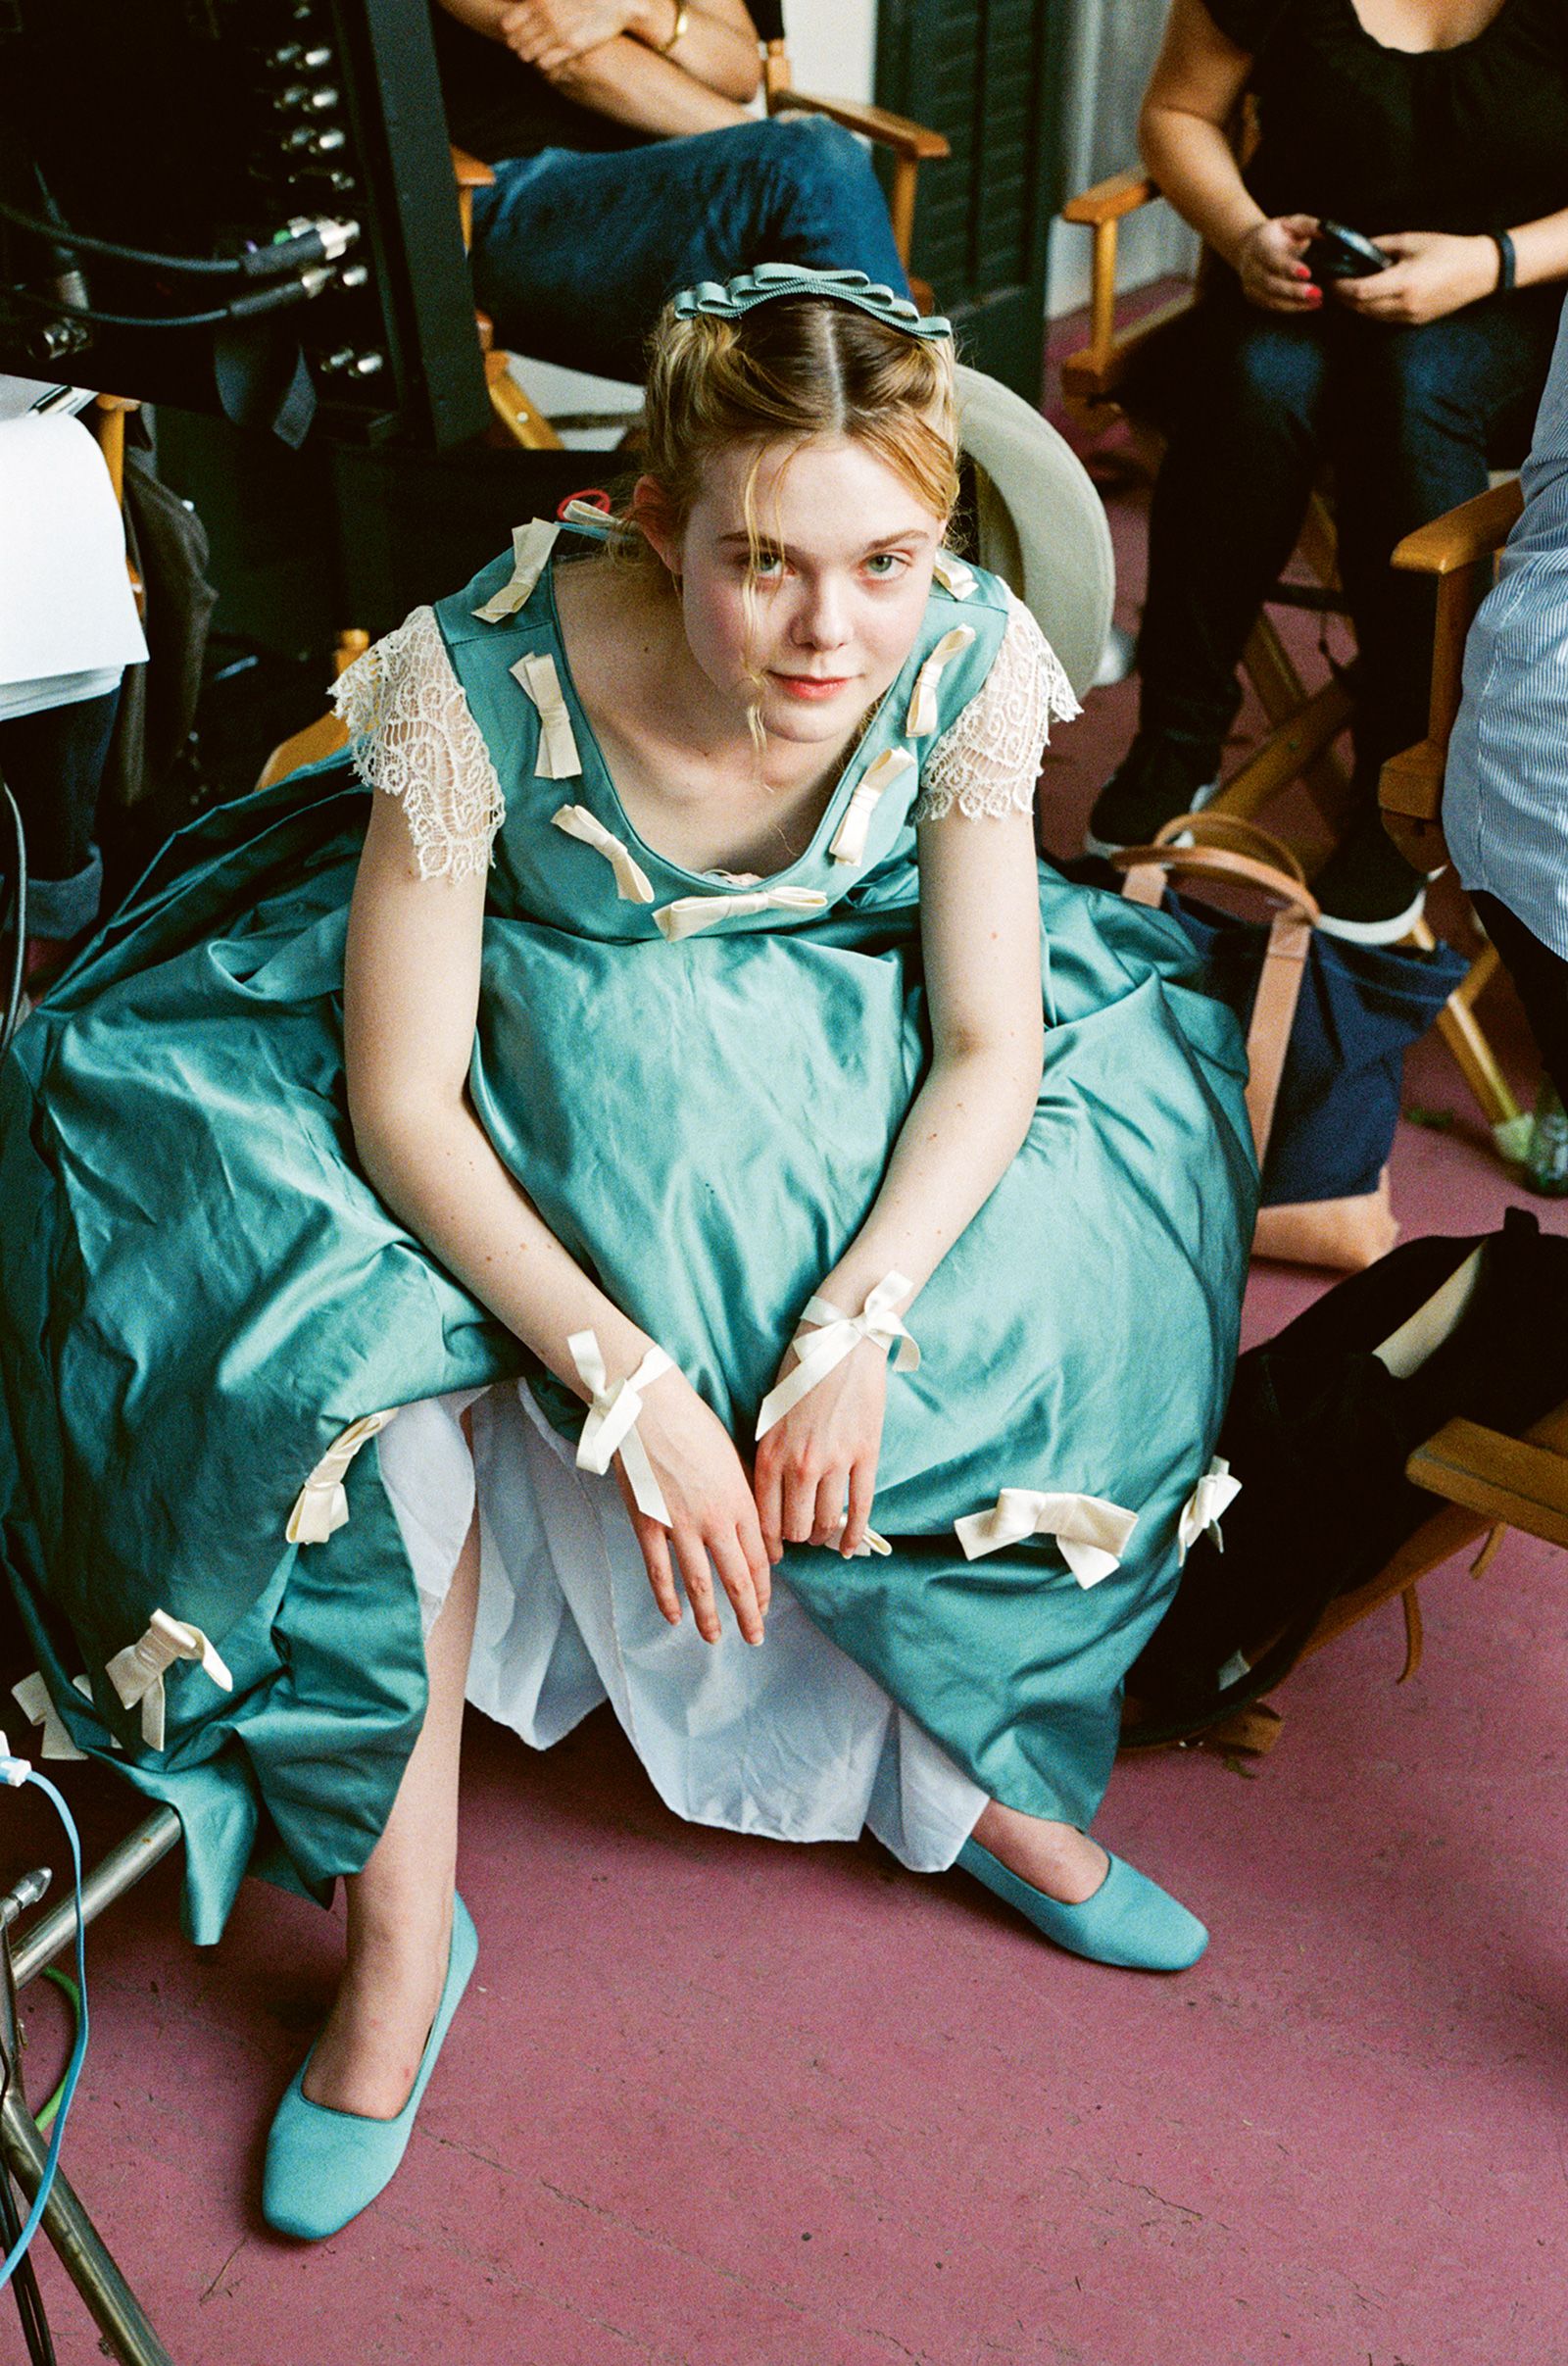 Elle Fanning in the 2017 Civil War-era drama "The Beguiled." Coppola writes, "I love that Elle is really the same person as the girl I met when she was eleven on 'Somewhere'" — Fanning's first film with Coppola in 2010.